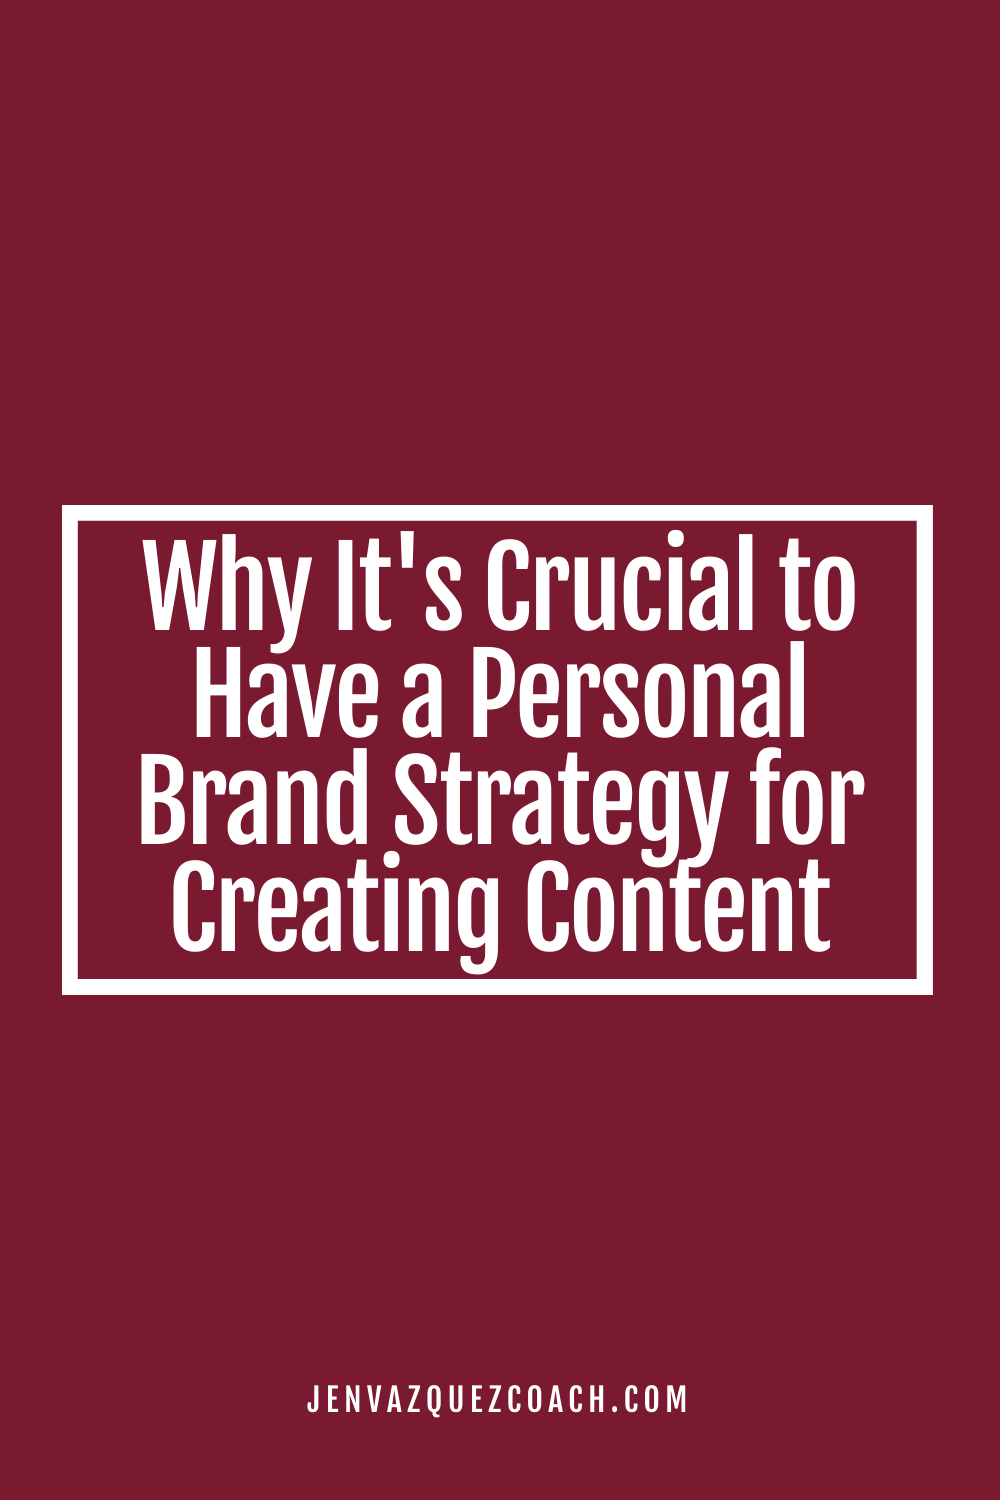 Why It's Crucial to Have a Personal Brand Strategy for Creating Content